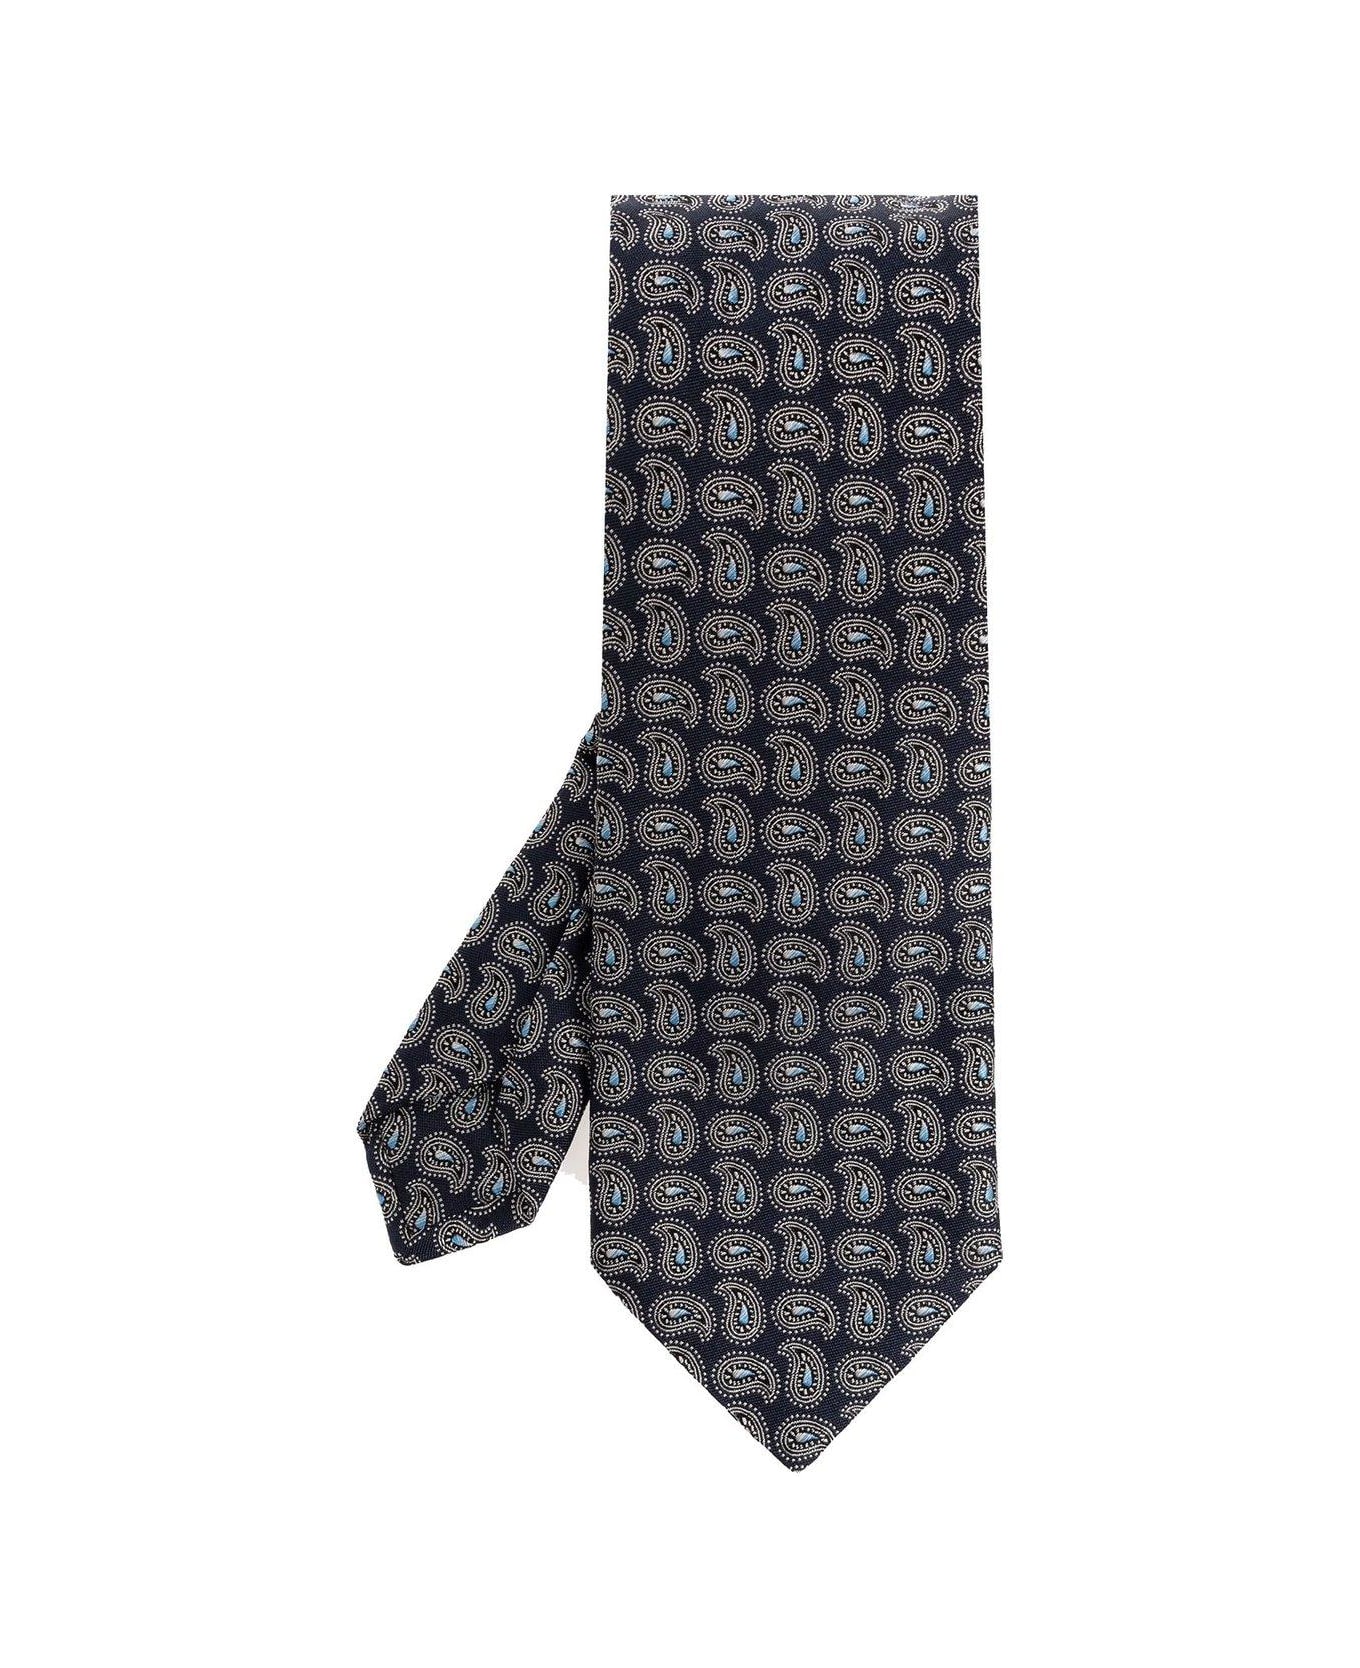 Etro Patterned Tie - Blue ネクタイ